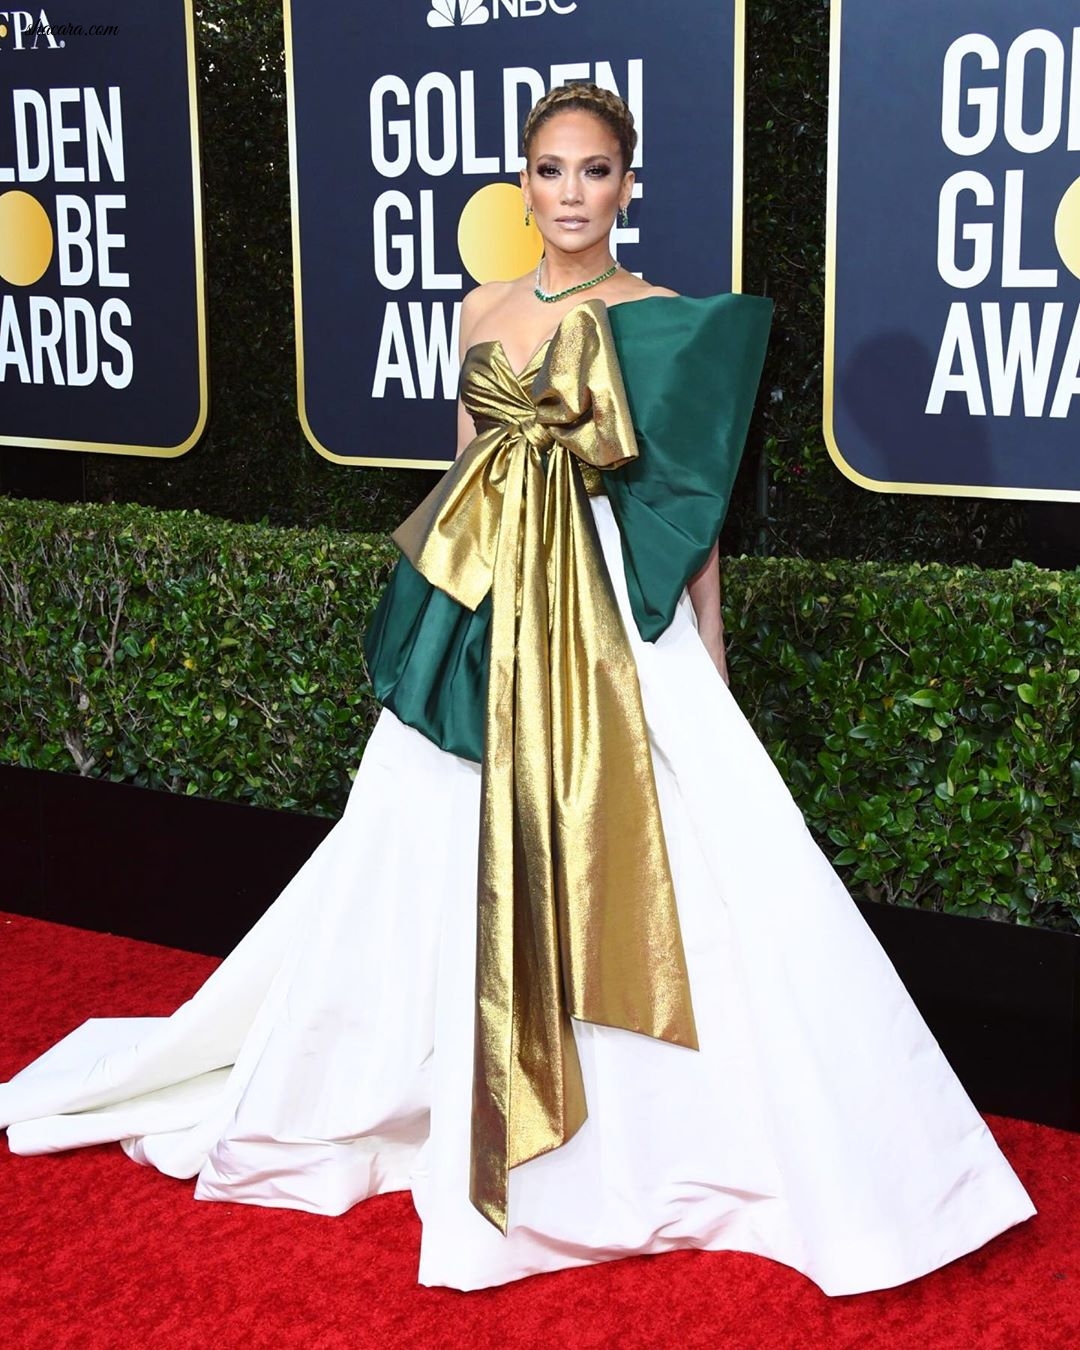 Golden Globe 2020: Must-See Top 10 Looks From The Awards Ceremony